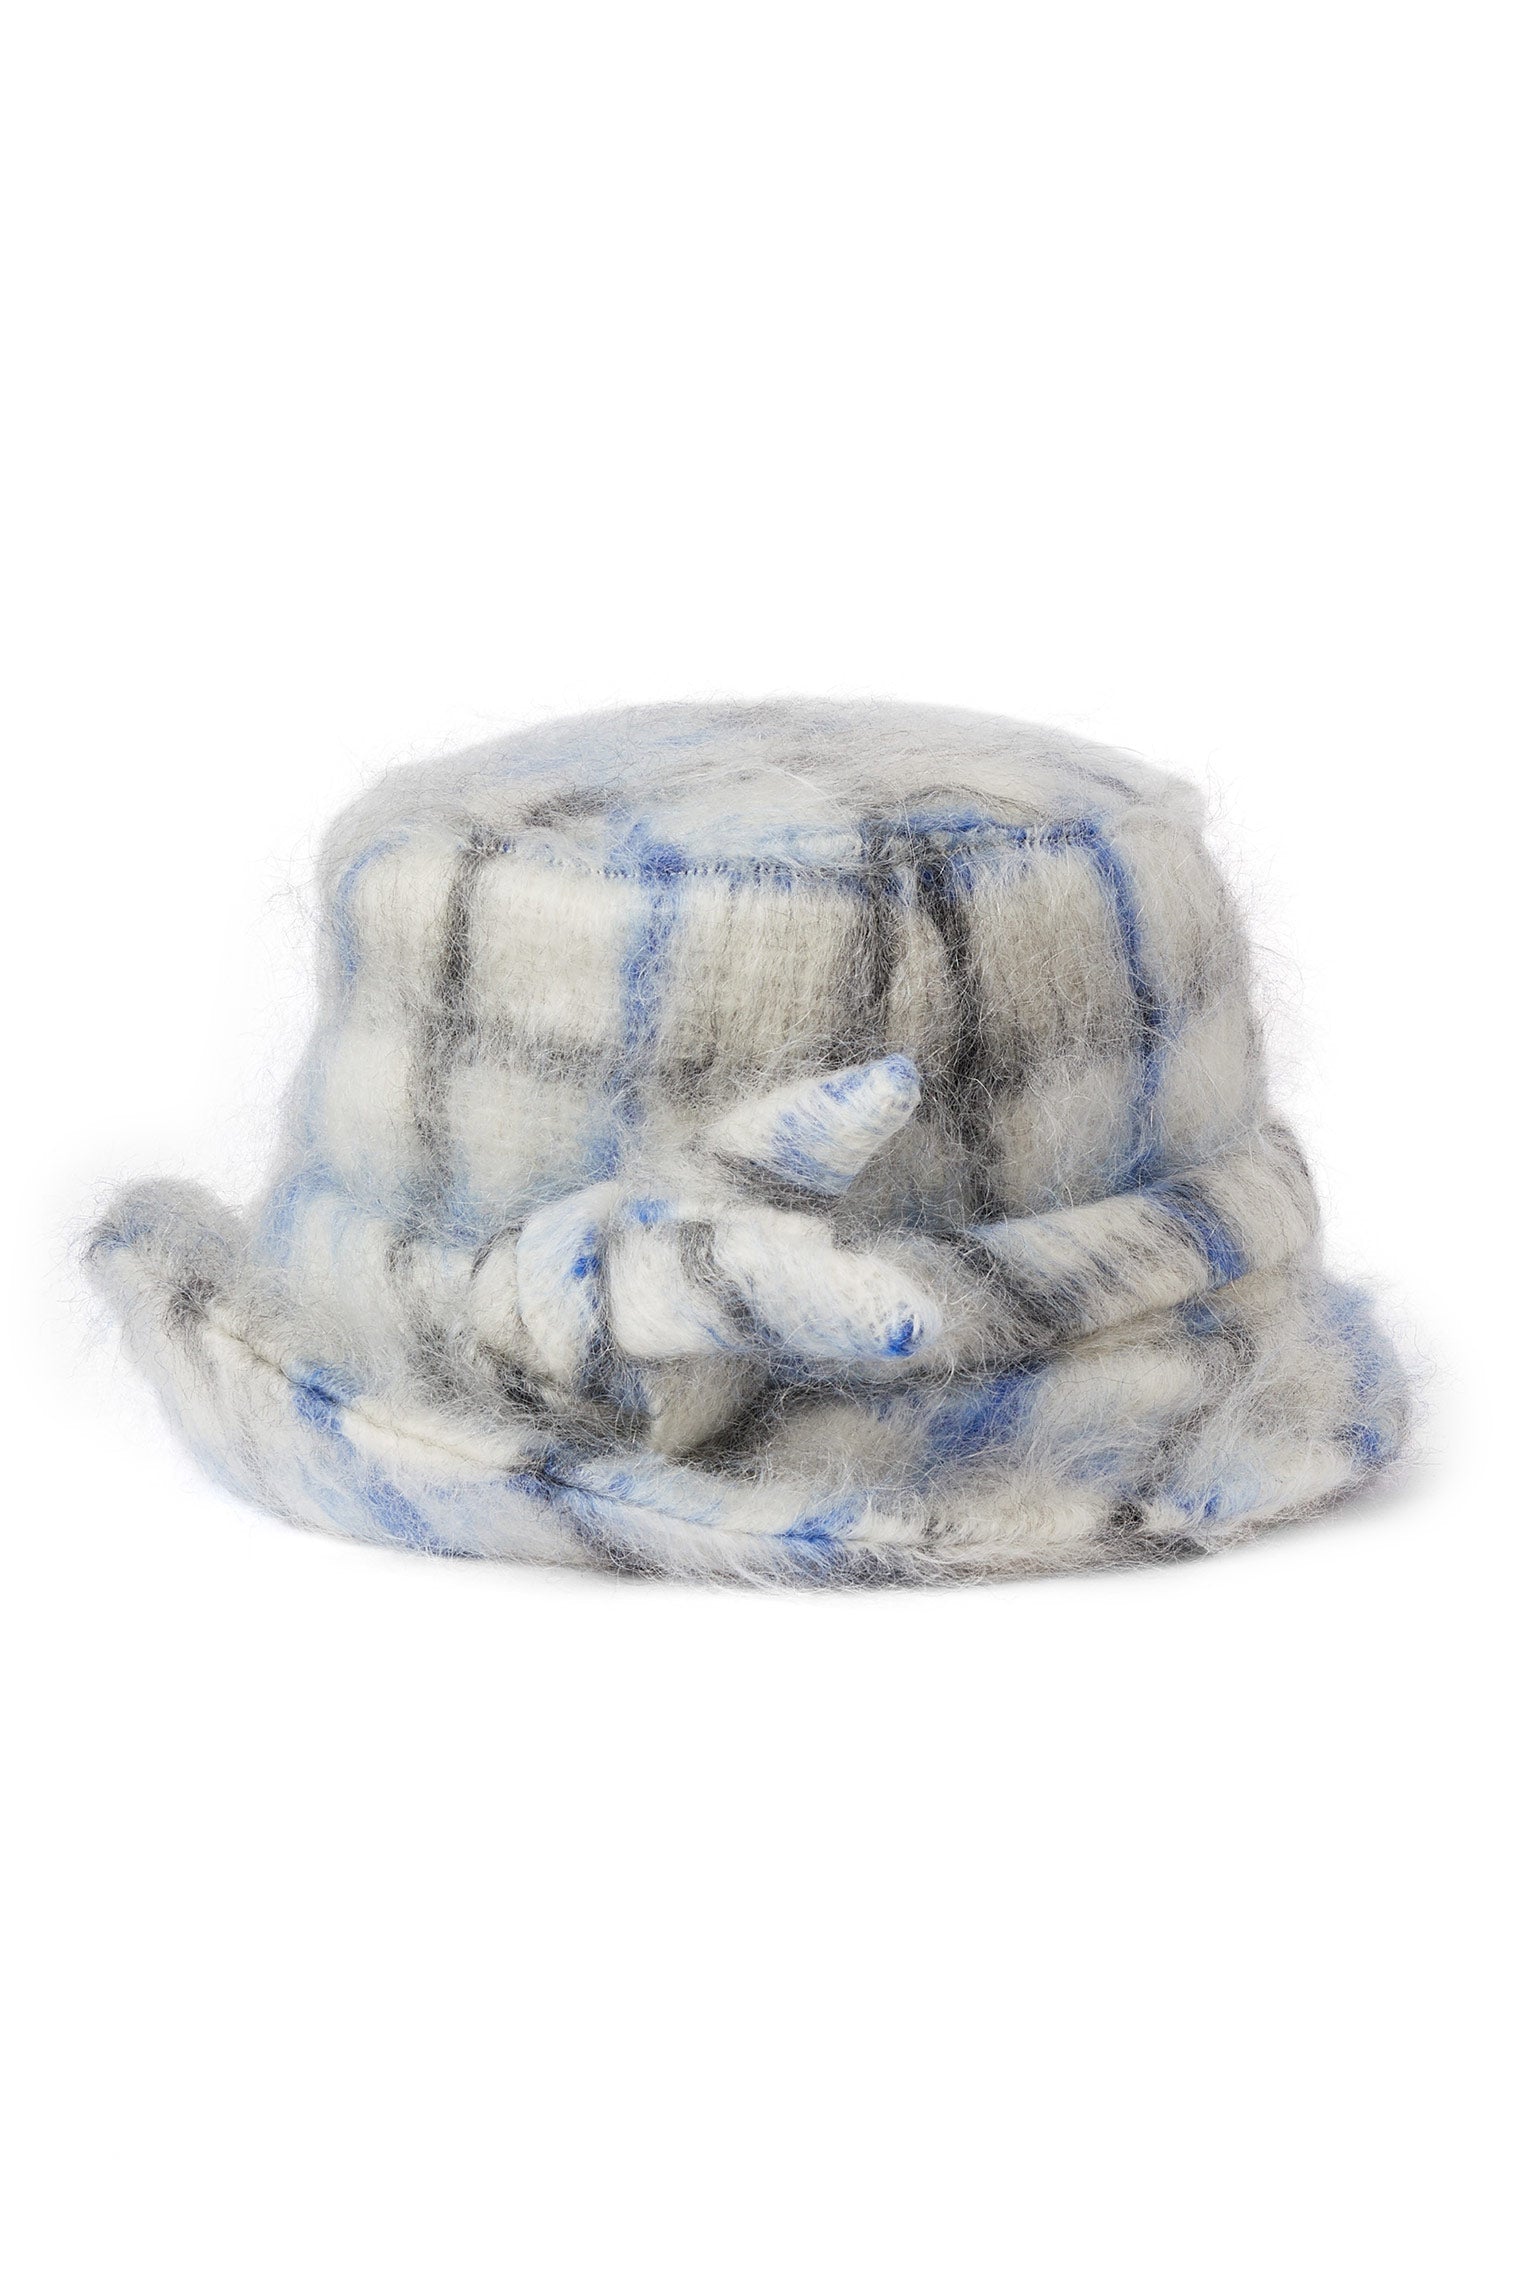 Dolores White Check Cloche - Women's Fedoras, Trilbies & Cloches - Lock & Co. Hatters London UK